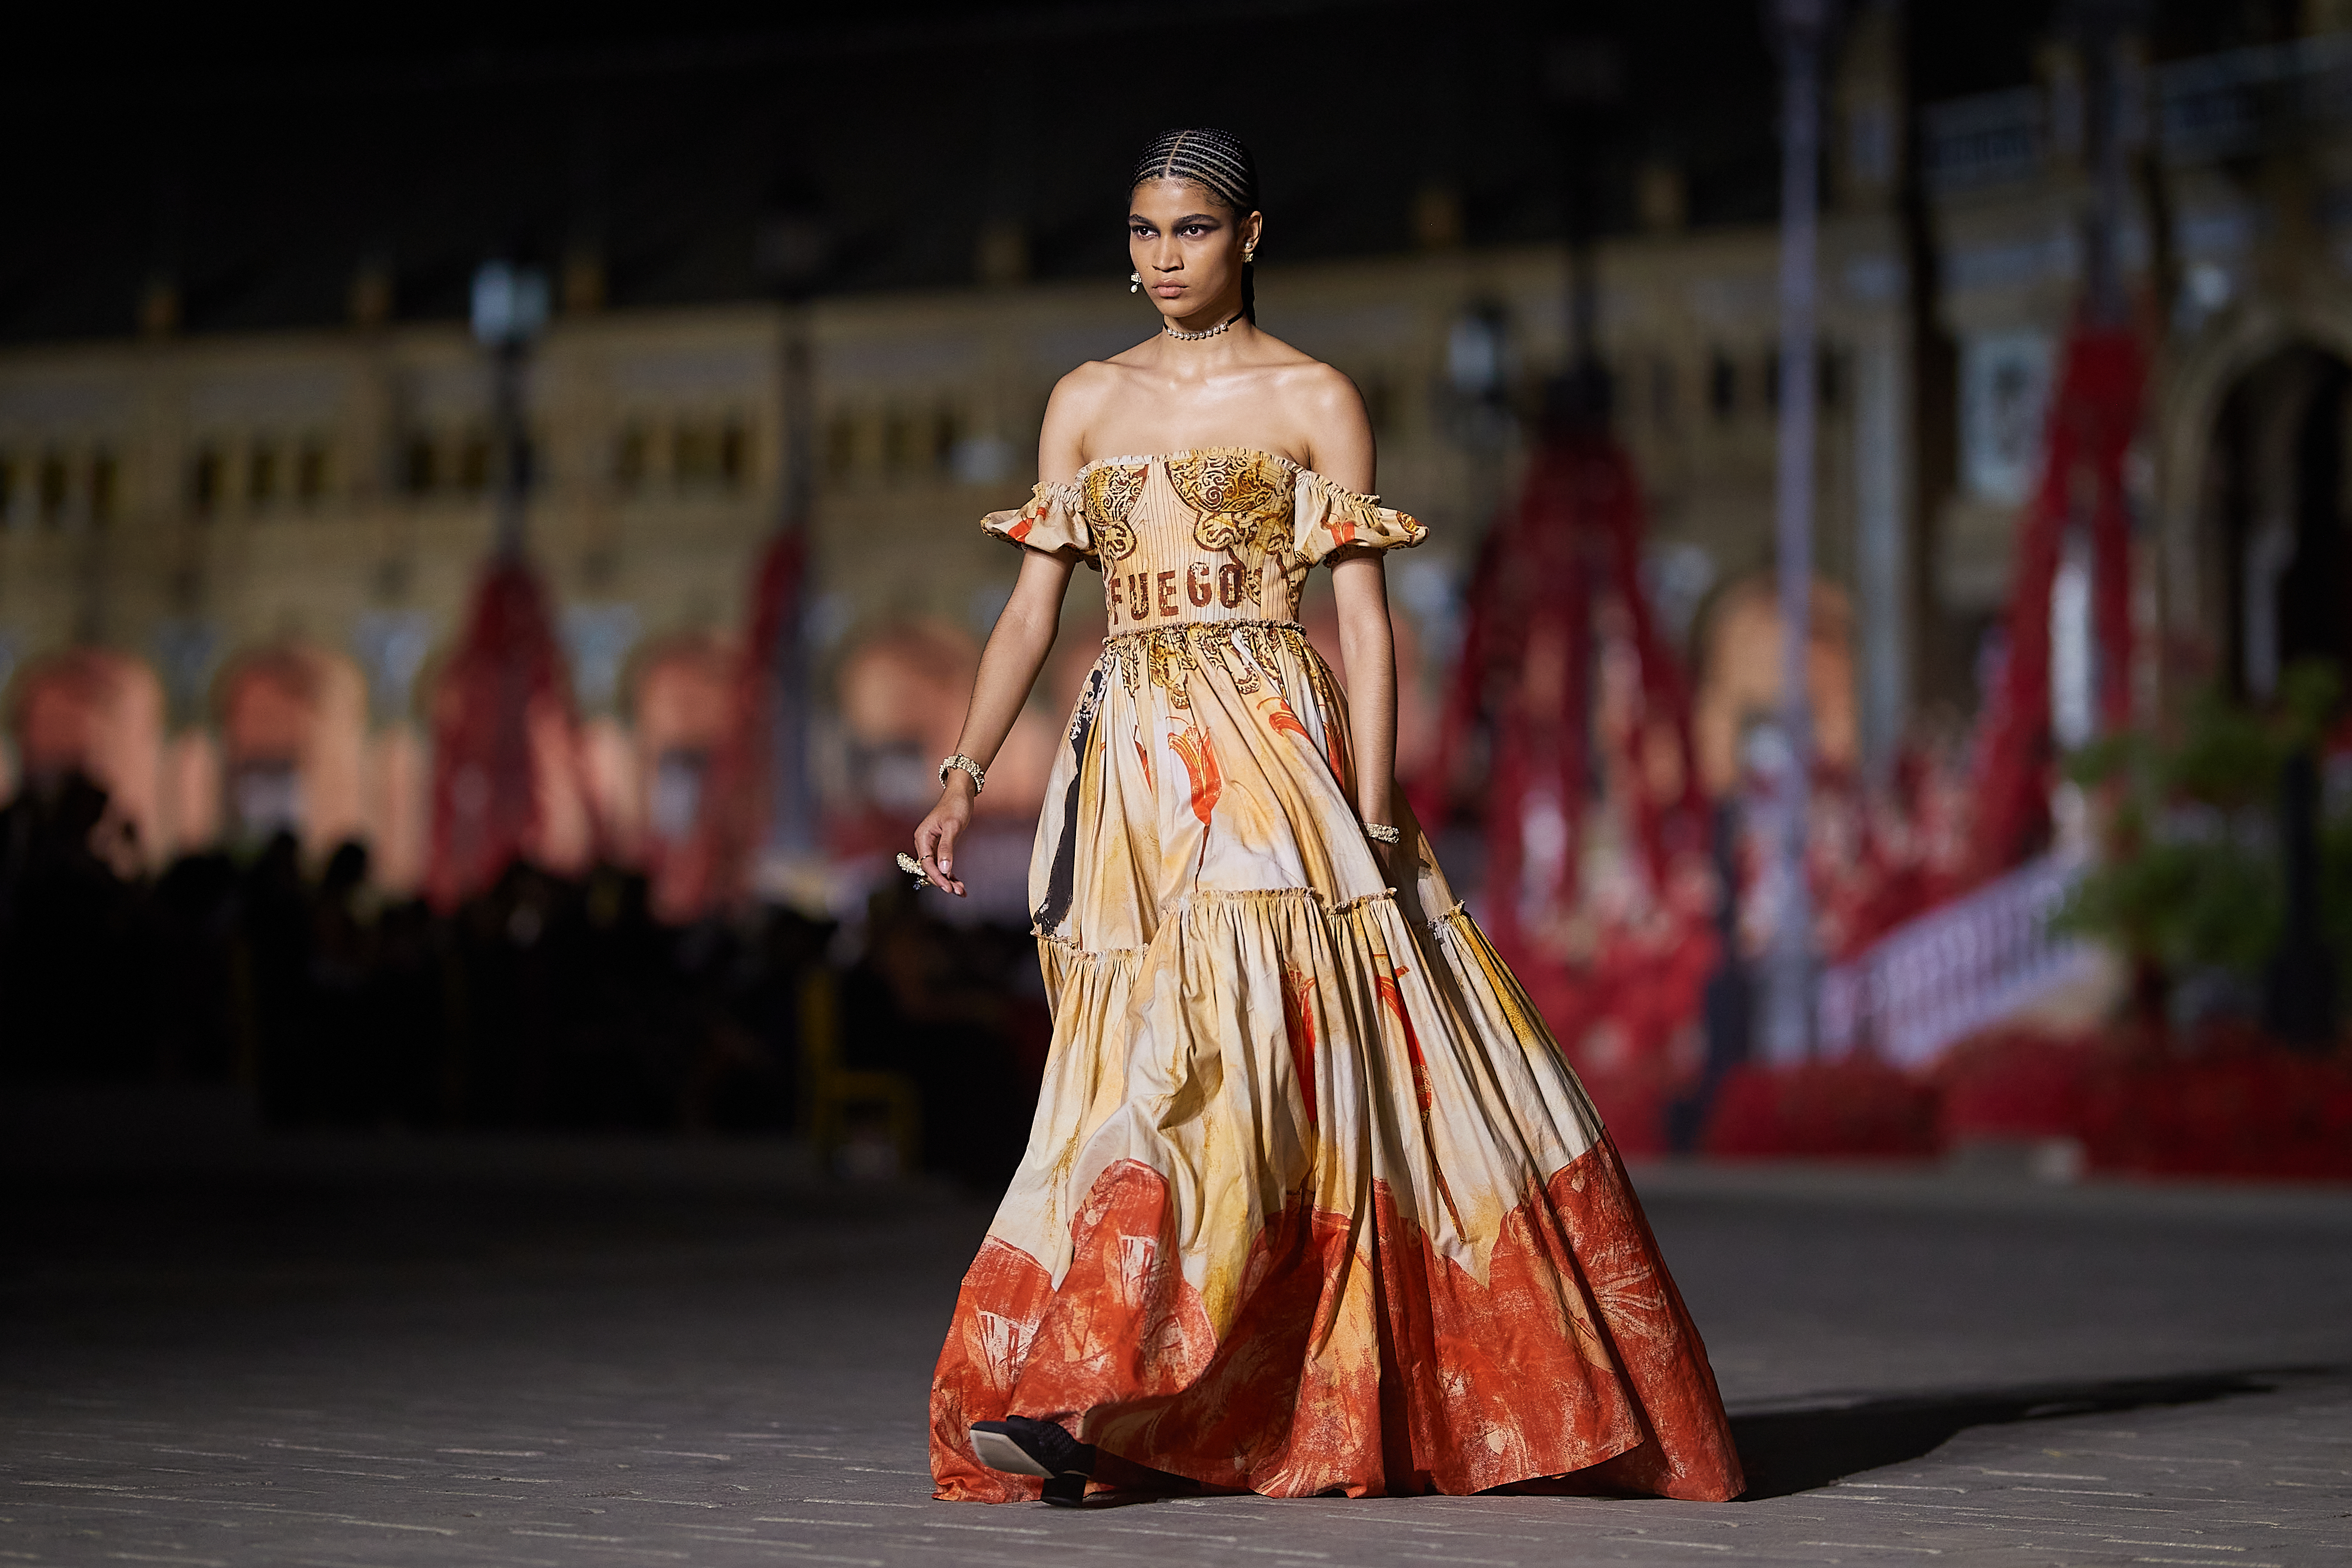 Dior Sets Cruise Campaign Inside Seville Palace